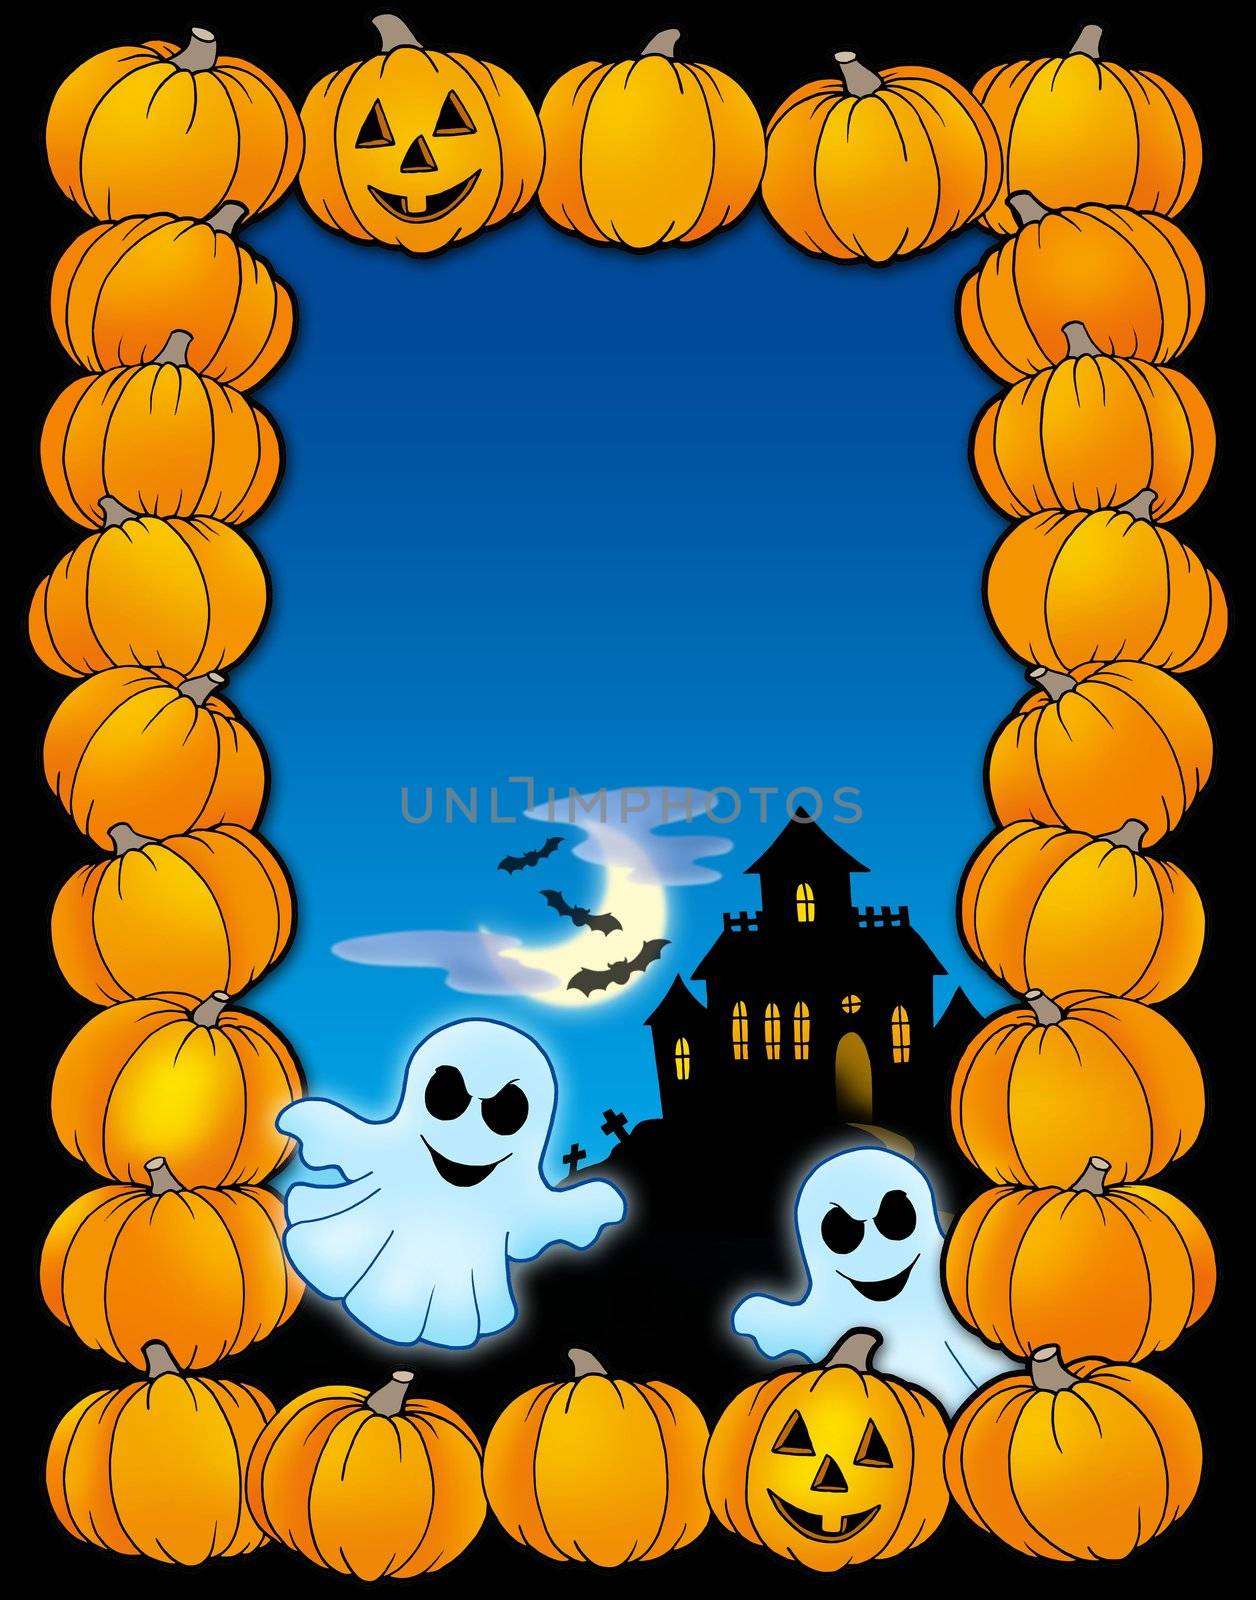 Halloween frame with ghosts - color illustration.